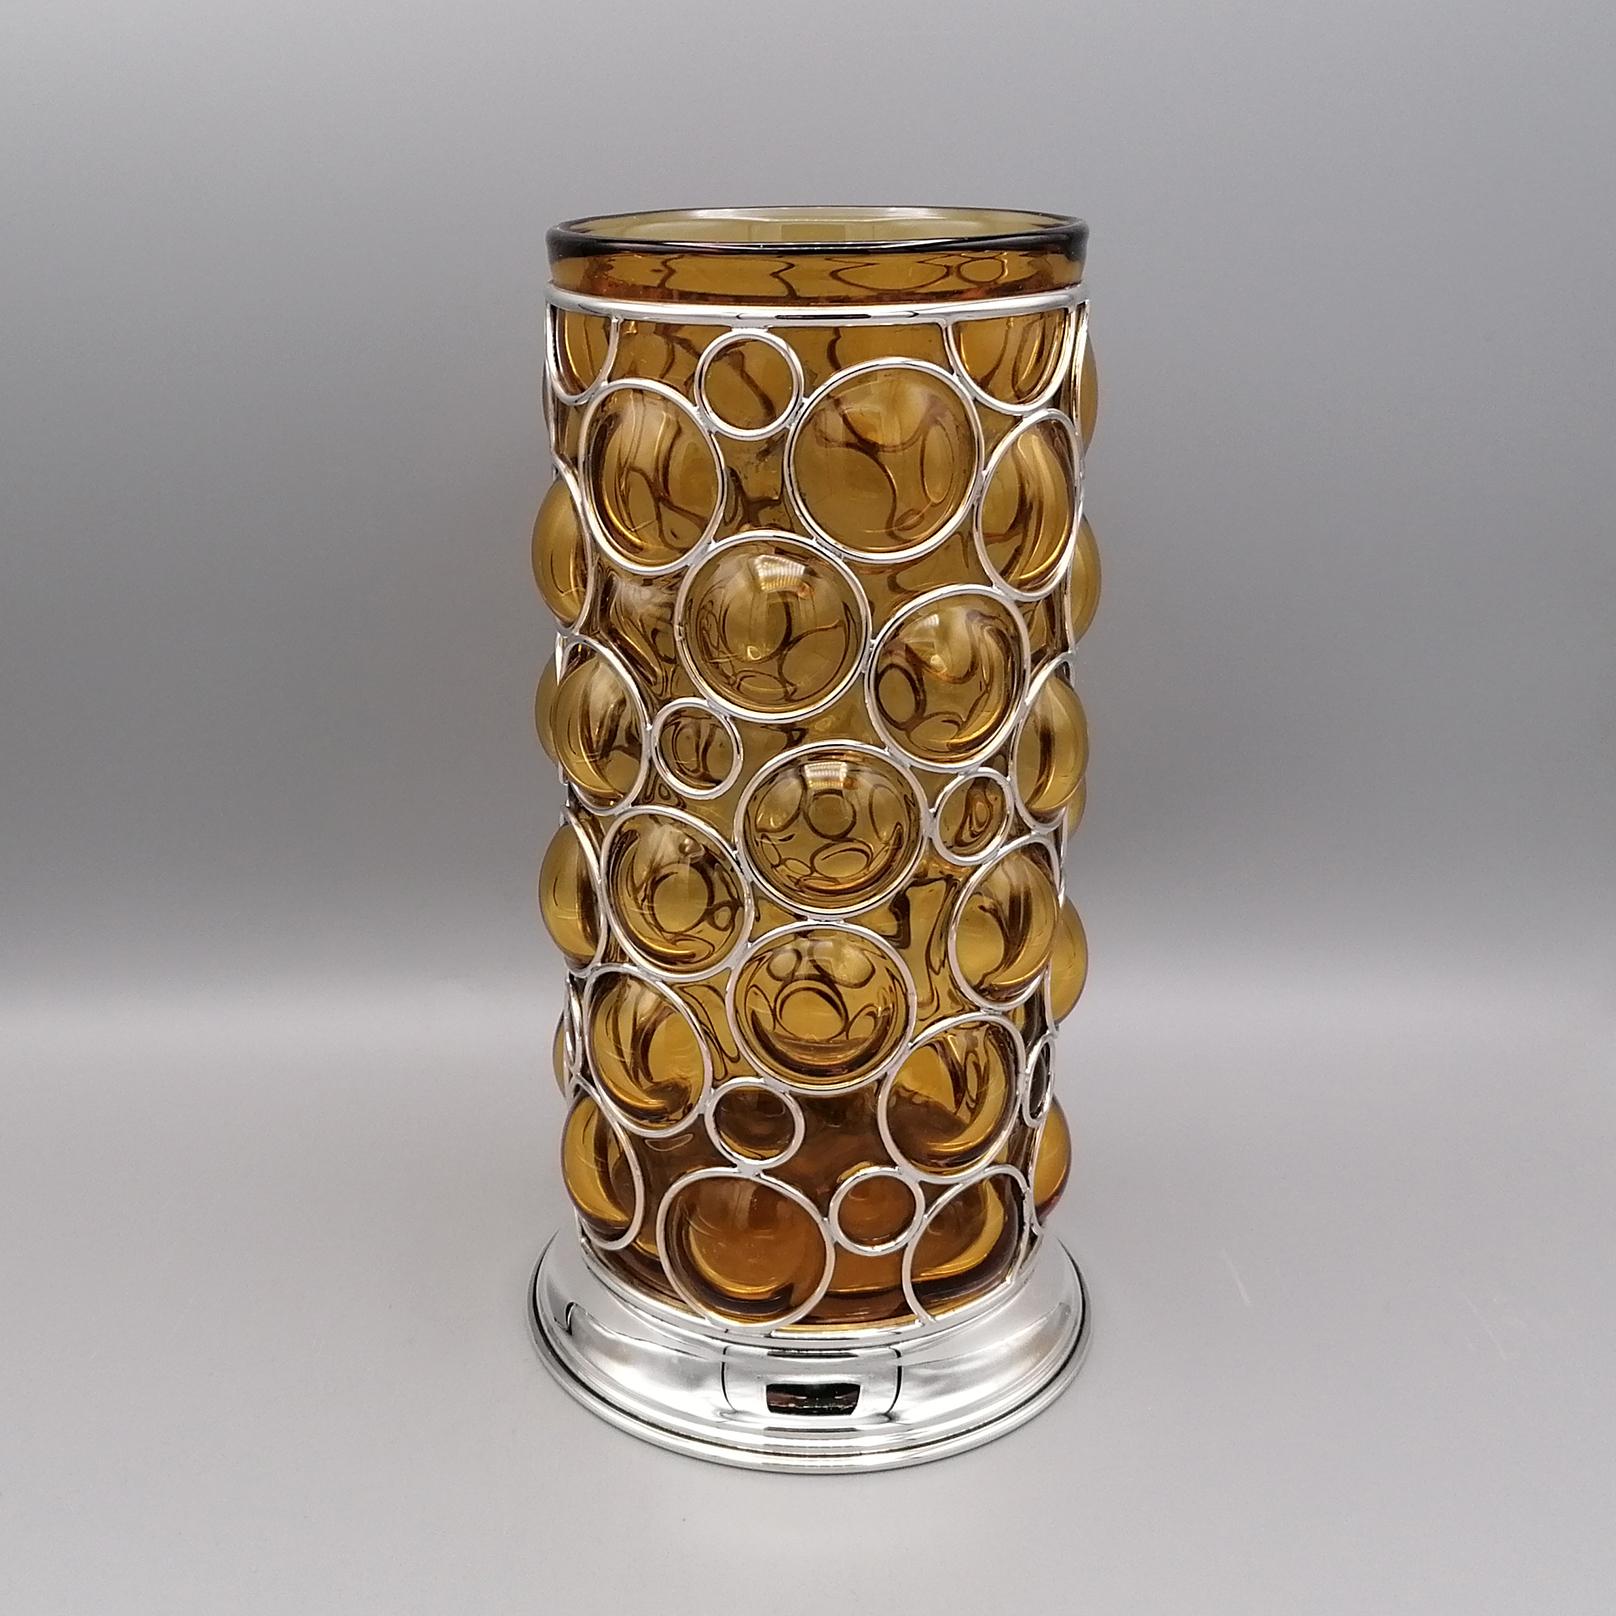 Murano glass vase with base and cage in solid sterling silver.
The amber-colored vase was made in Murano, Venice - Italy and subsequently a renaissance-style ring-shaped sterling silver grid was mounted to embellish the work. 
The vase was then